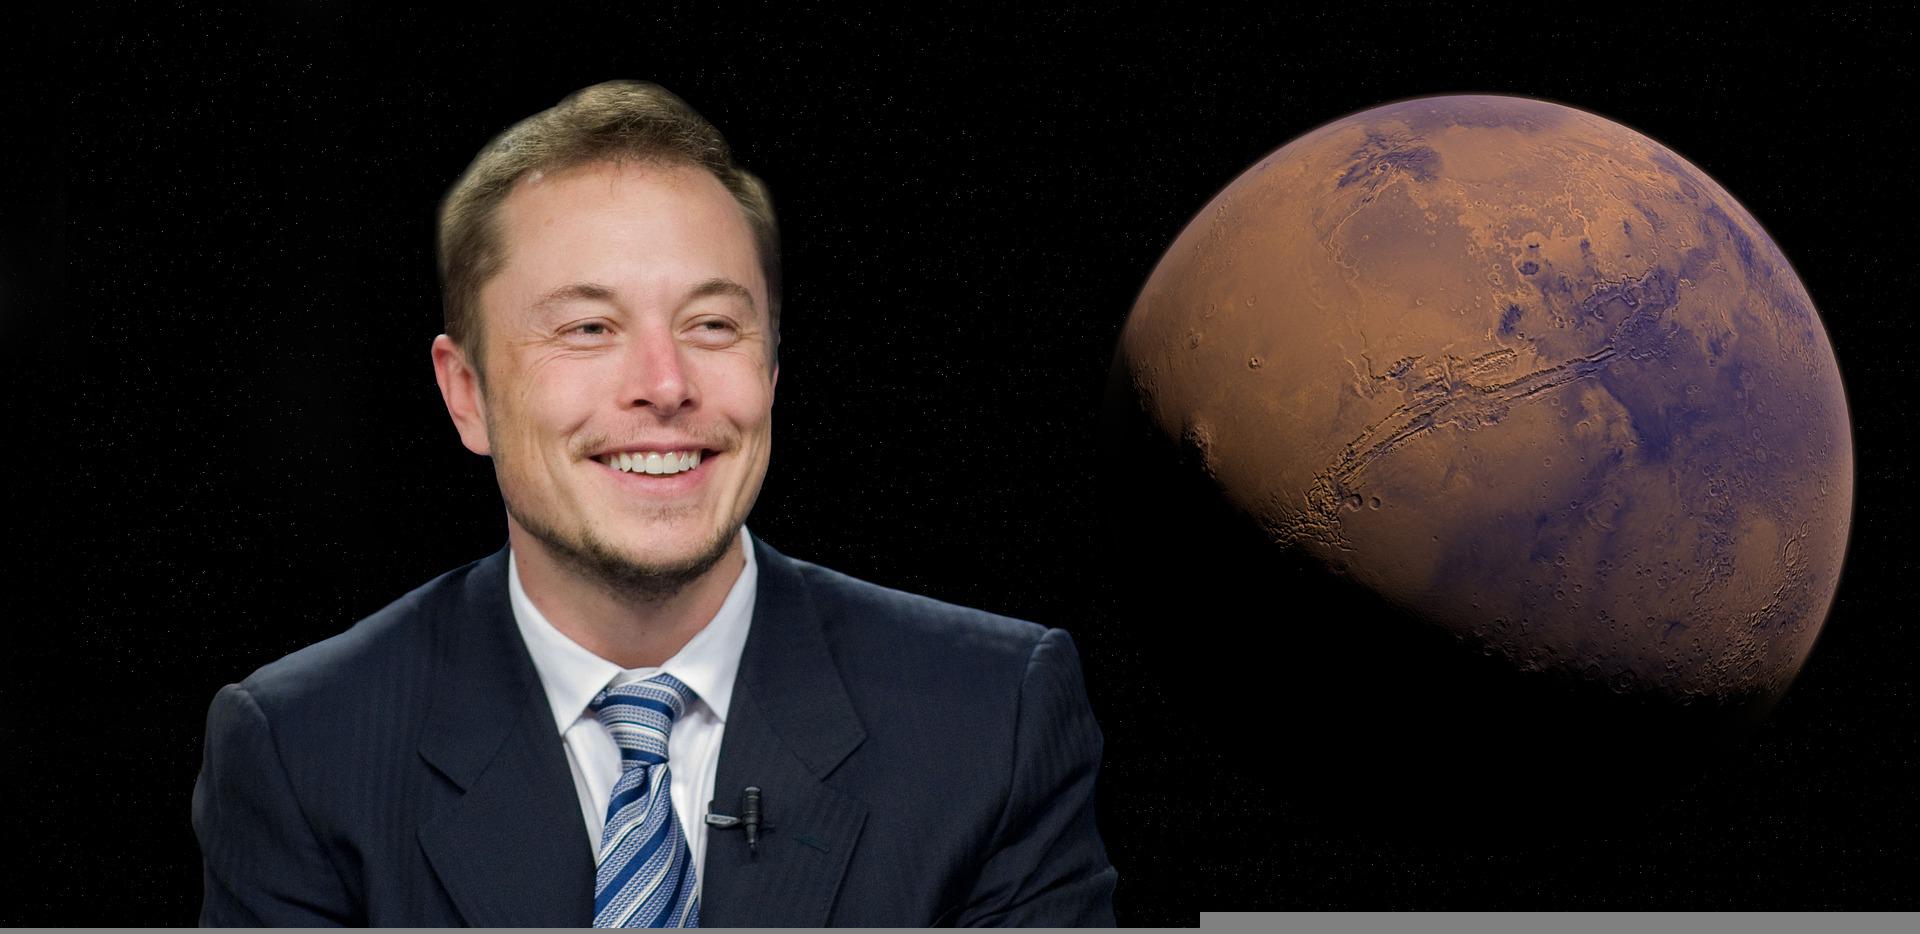 image showing elon musk and the planet Mars